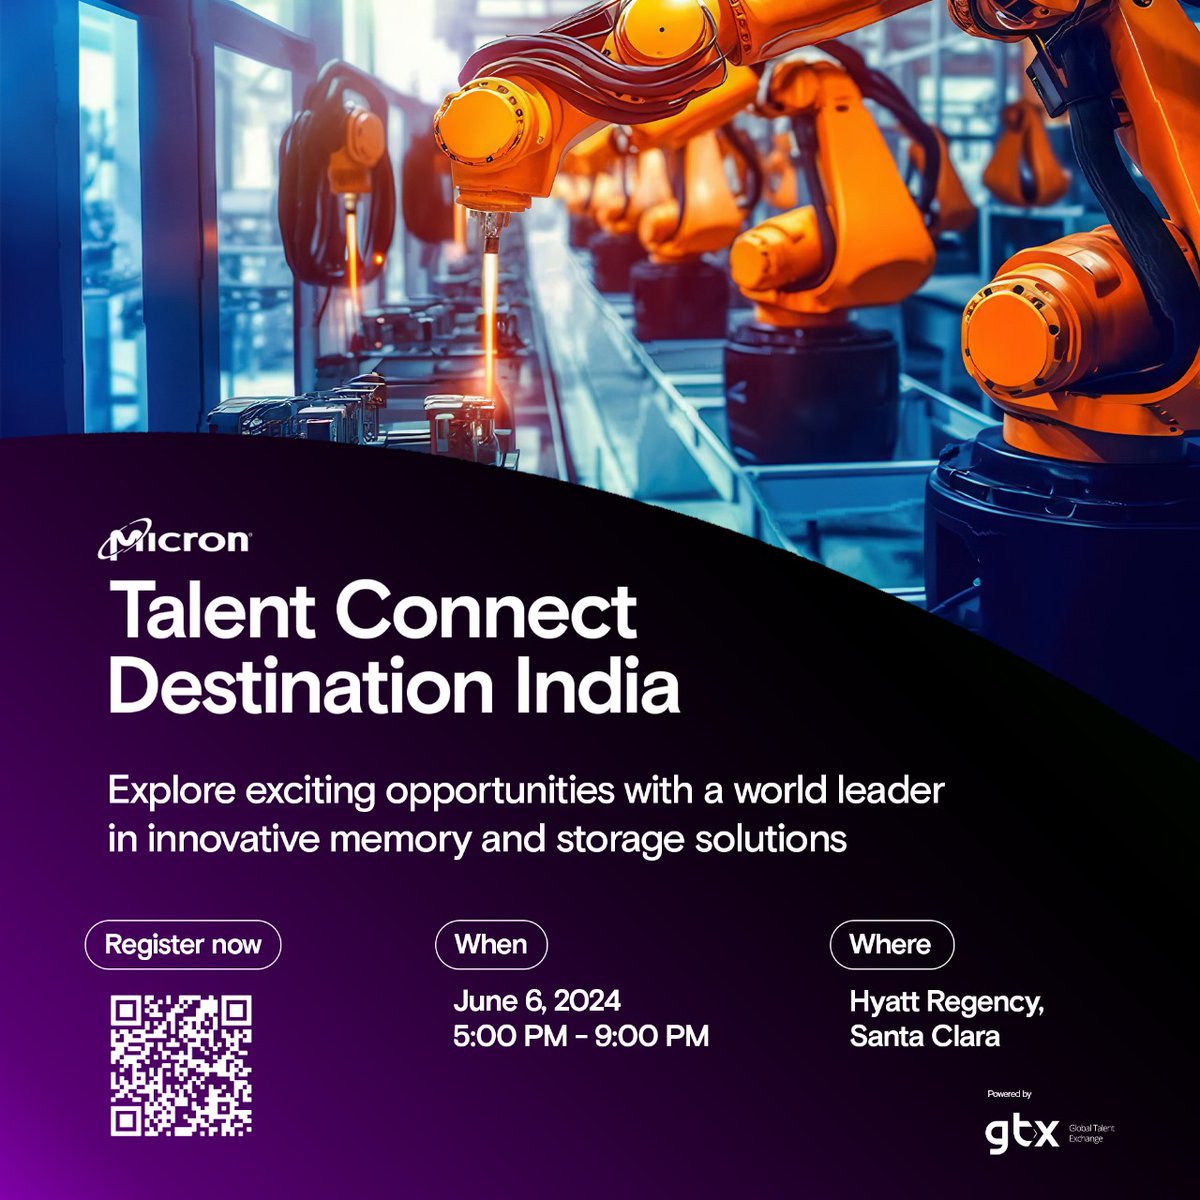 Here’s calling all NRIs in #Semiconductors! Join us at Micron Talent Connect - Destination India🇮🇳 Connect w/ Micron’s leadership team Gain valuable insights Network w/ industry peers Learn about Micron’s projects Discover exciting careers Register now! microntalentconnect.globaltalex.com